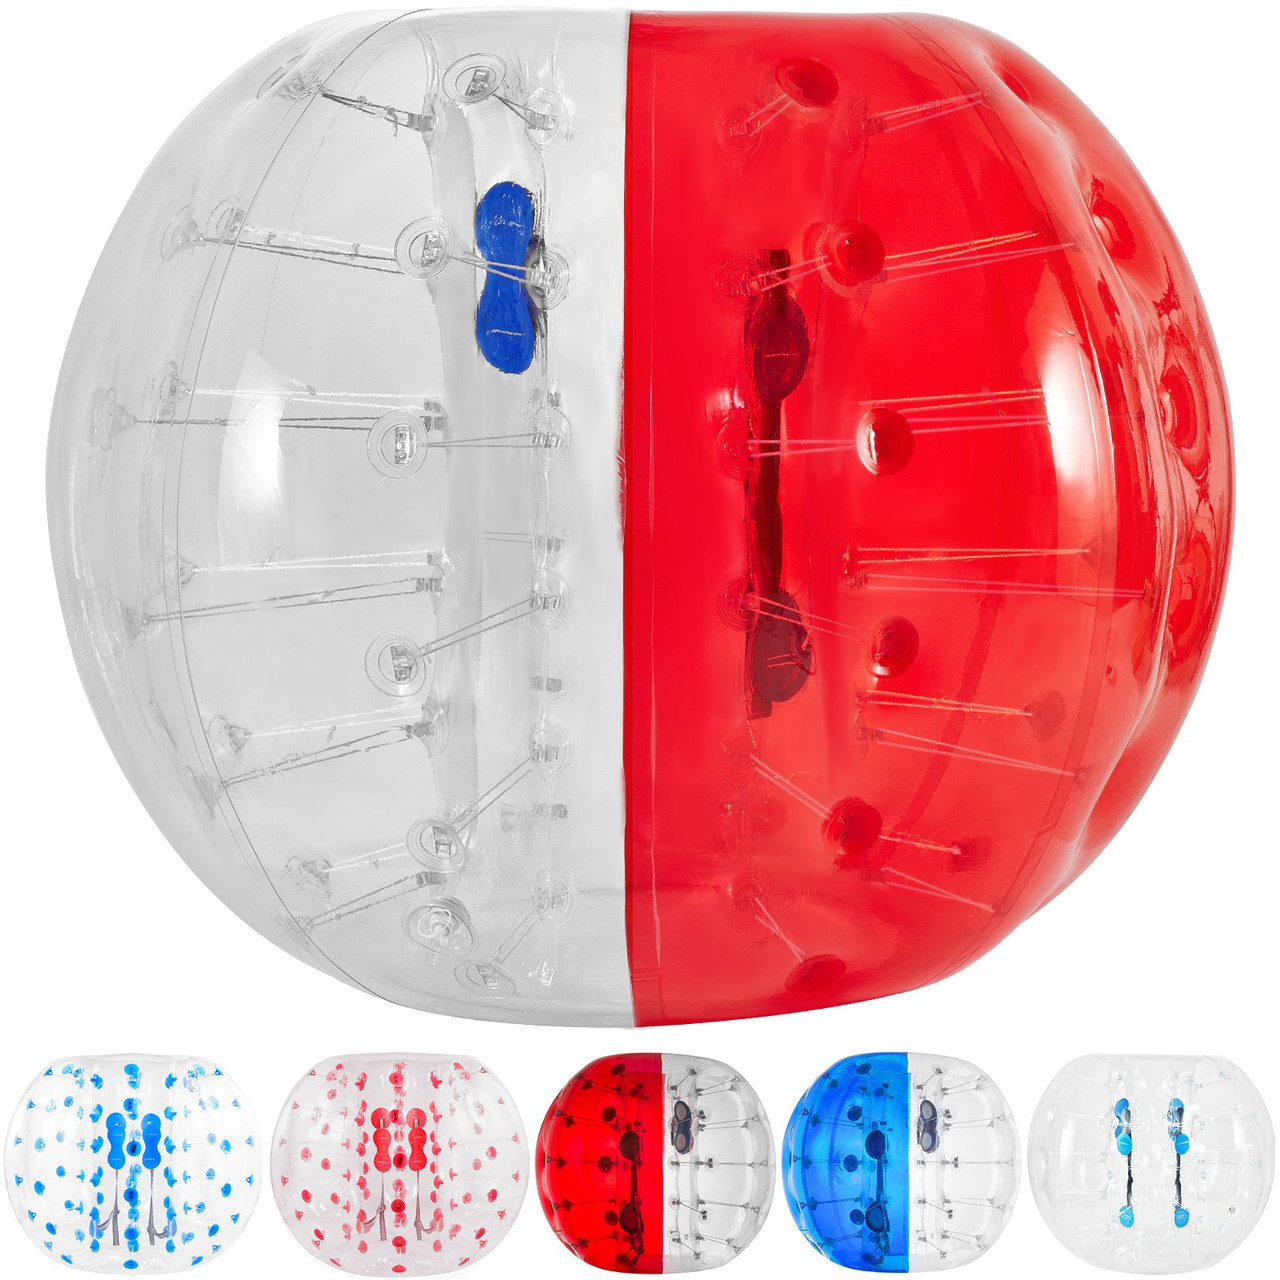 Inflatable Bumper Ball 5 FT / 1.5M Diameter, Bubble Soccer Ball, Blow It Up in 5 Min, Inflatable Zorb Ball for Adults or Children (5 FT, Red)